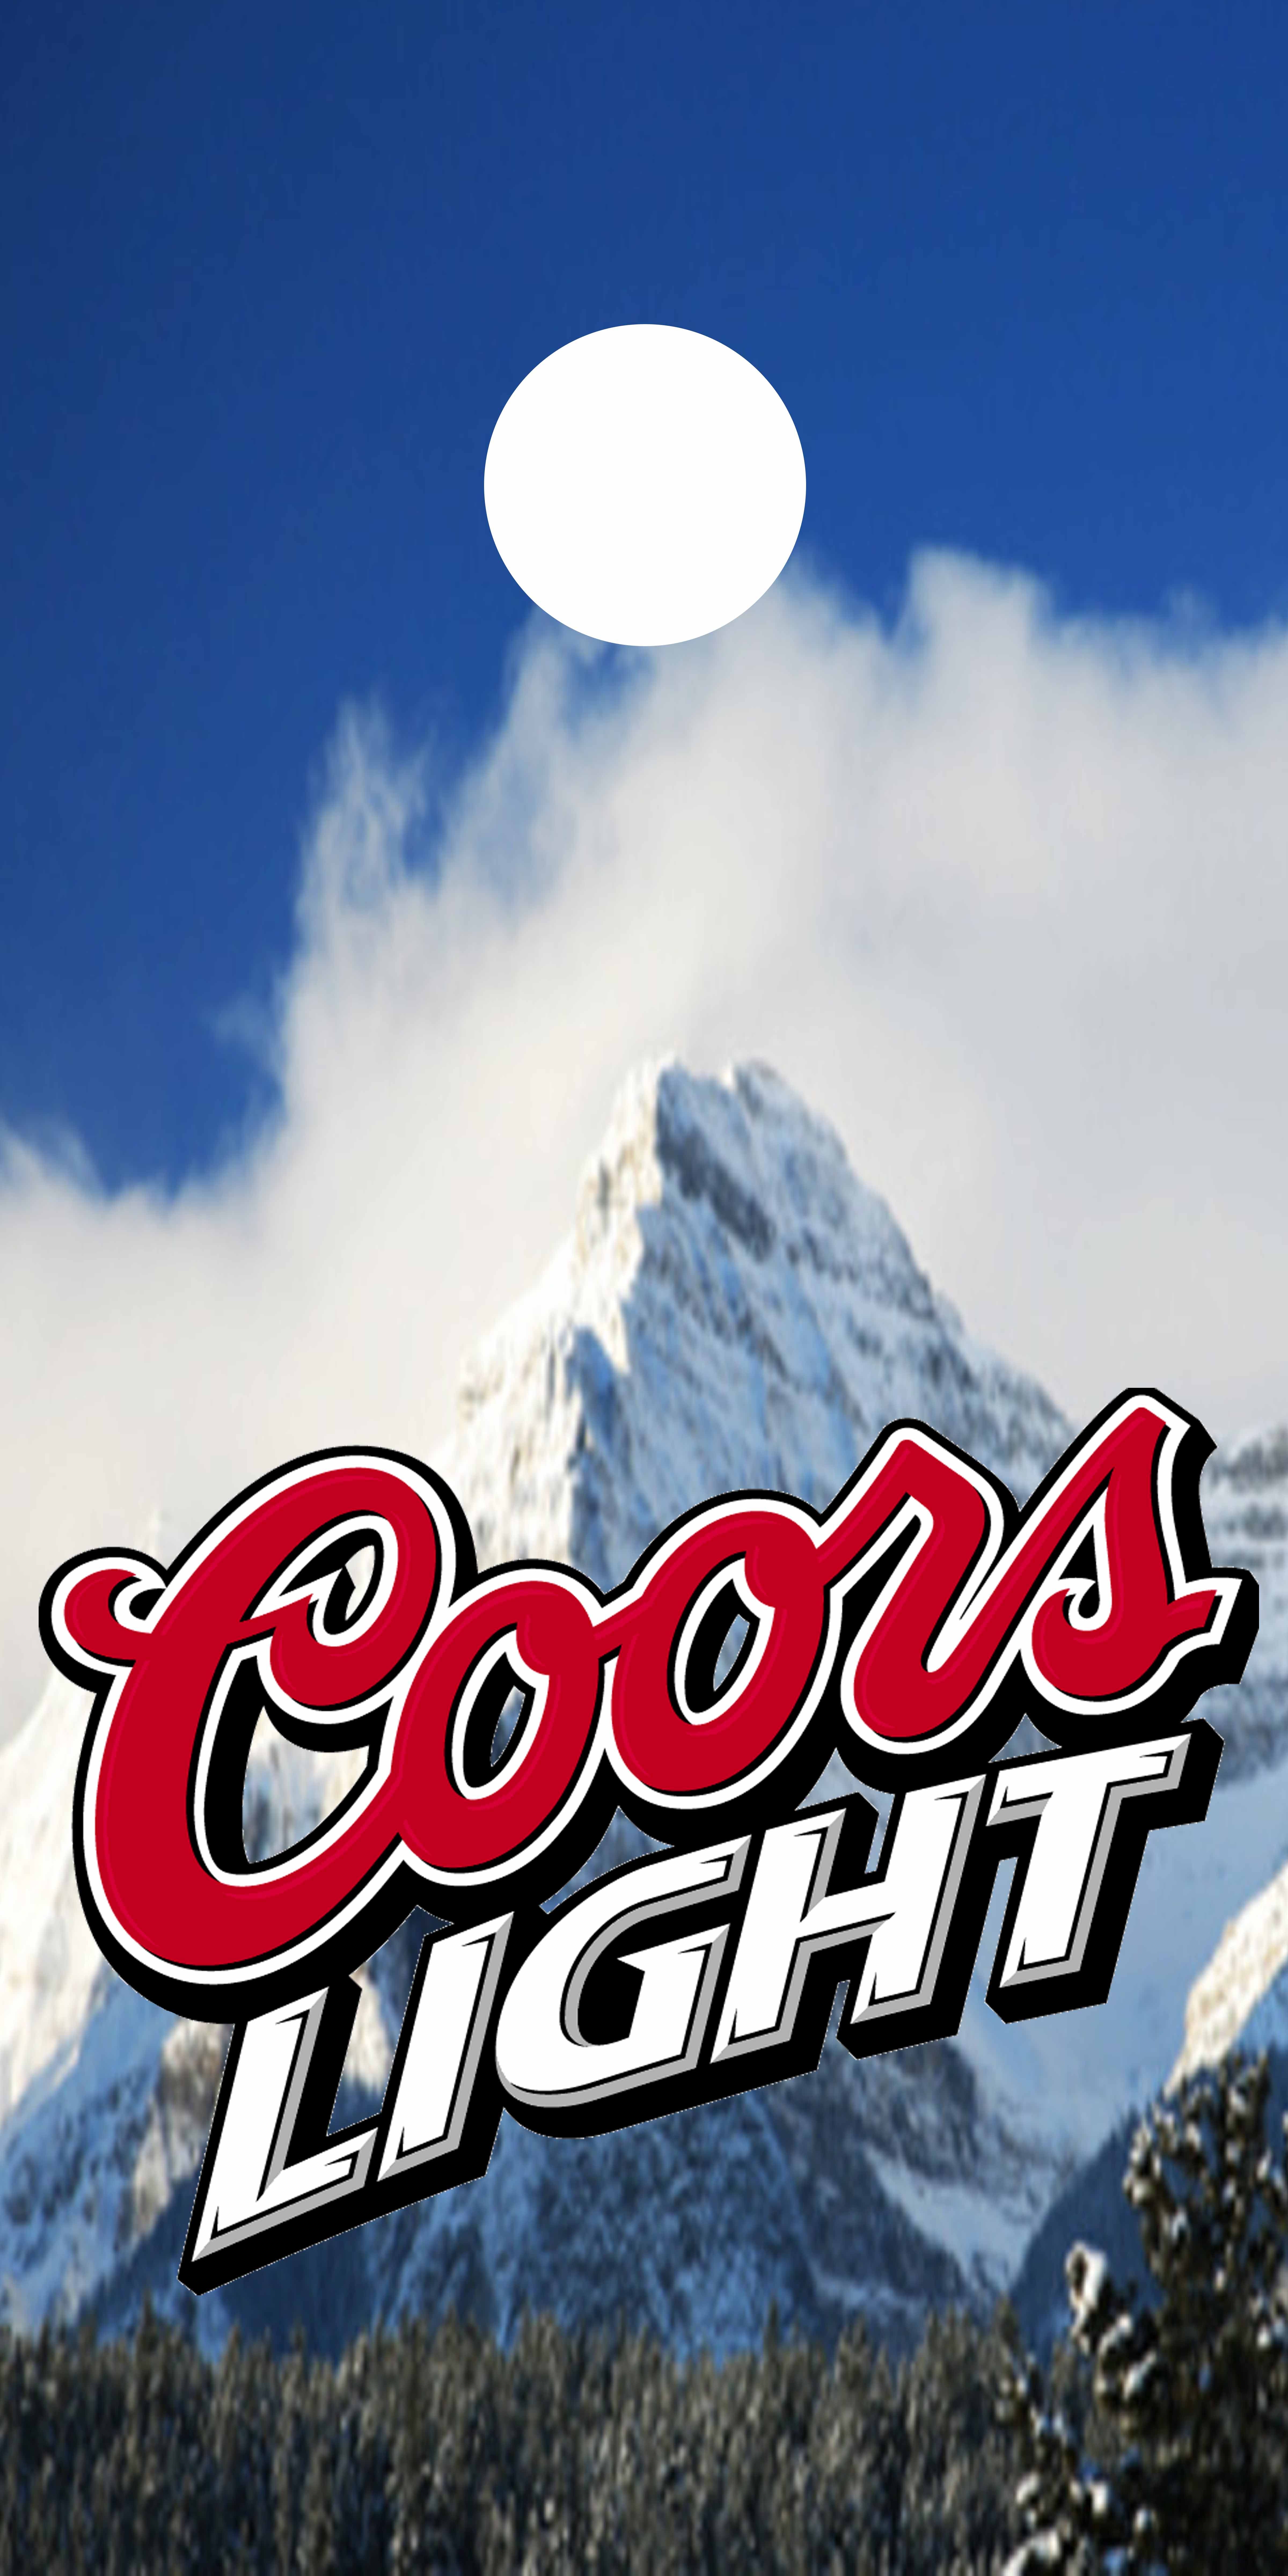 Coors Light. Best beer, Coors light beer can, Signed picture